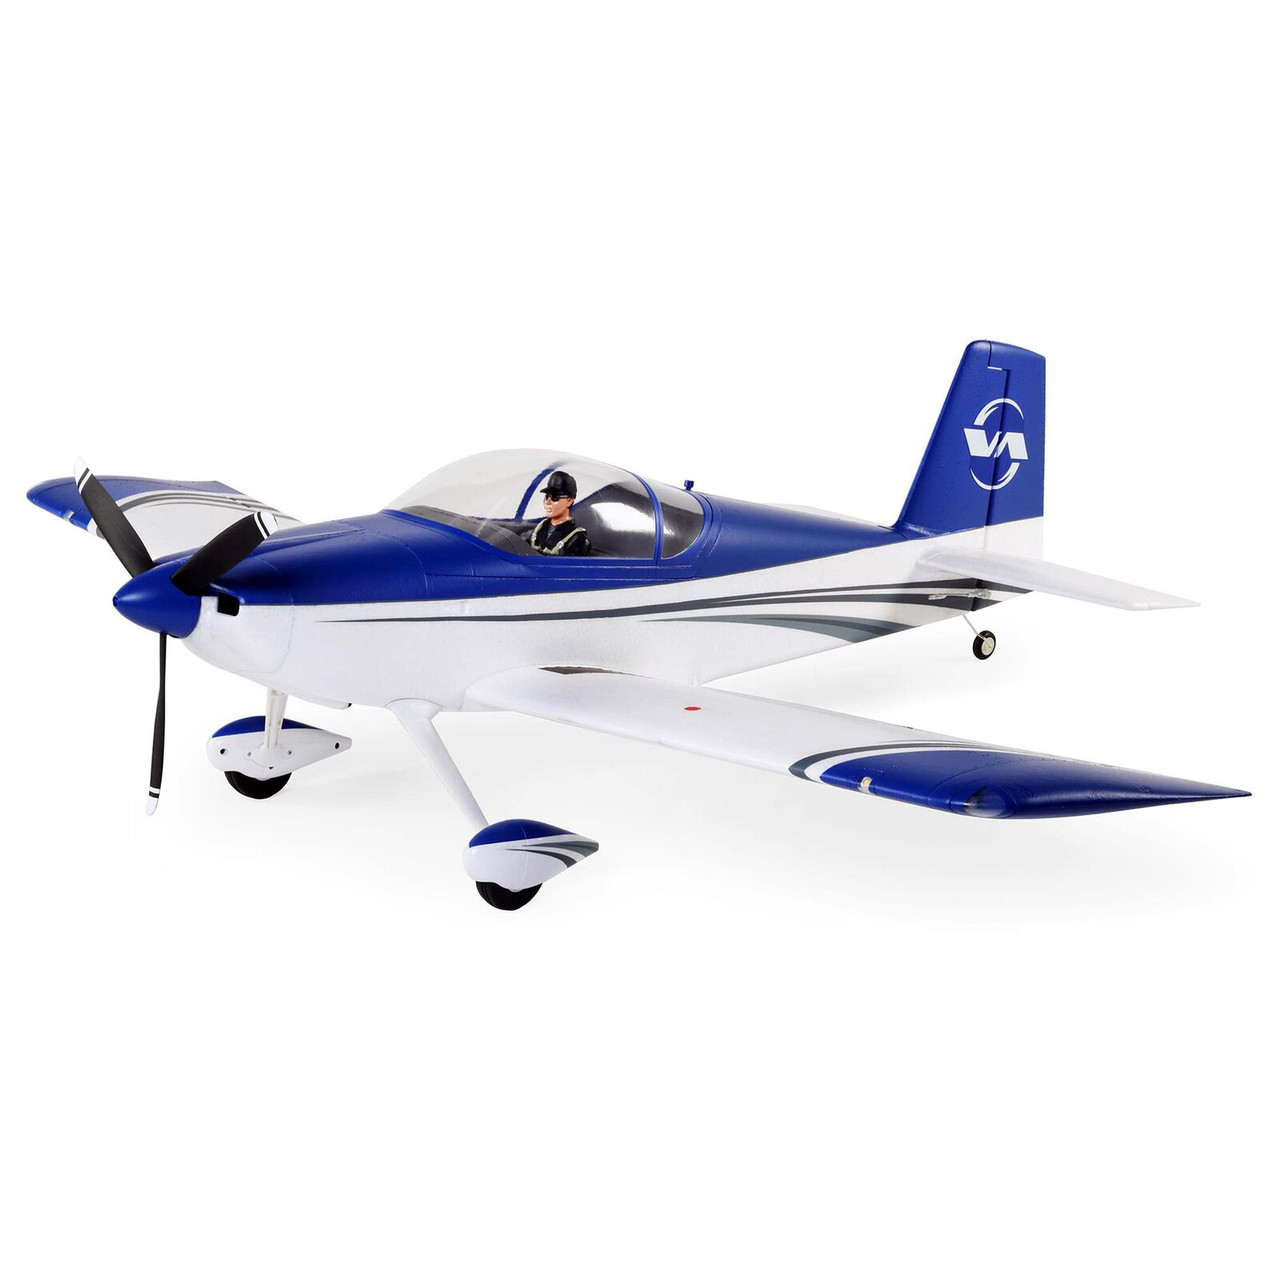 Eflite RV-7 1.1m BNF Basic with SAFE Select and AS3X